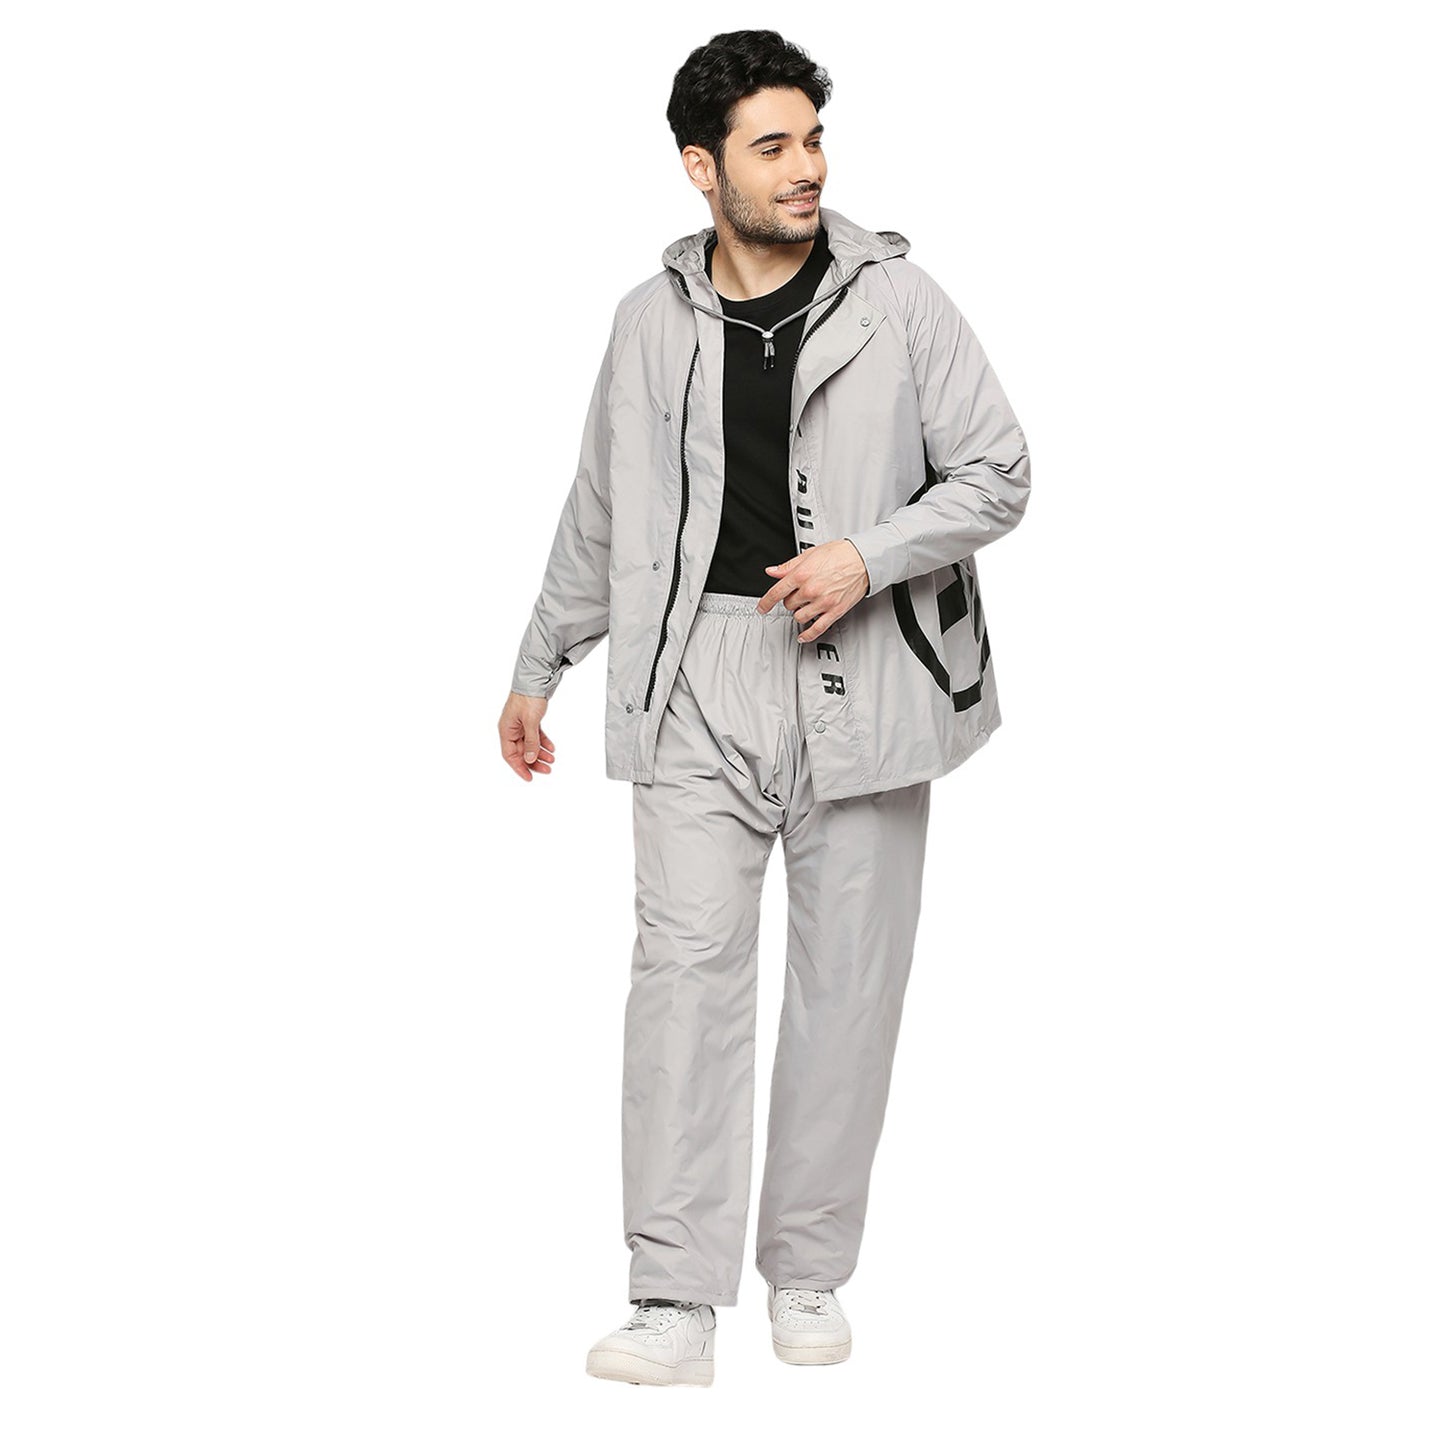 Smoky Gray Reversible Raincoat Suit with Free-leak proof pouch